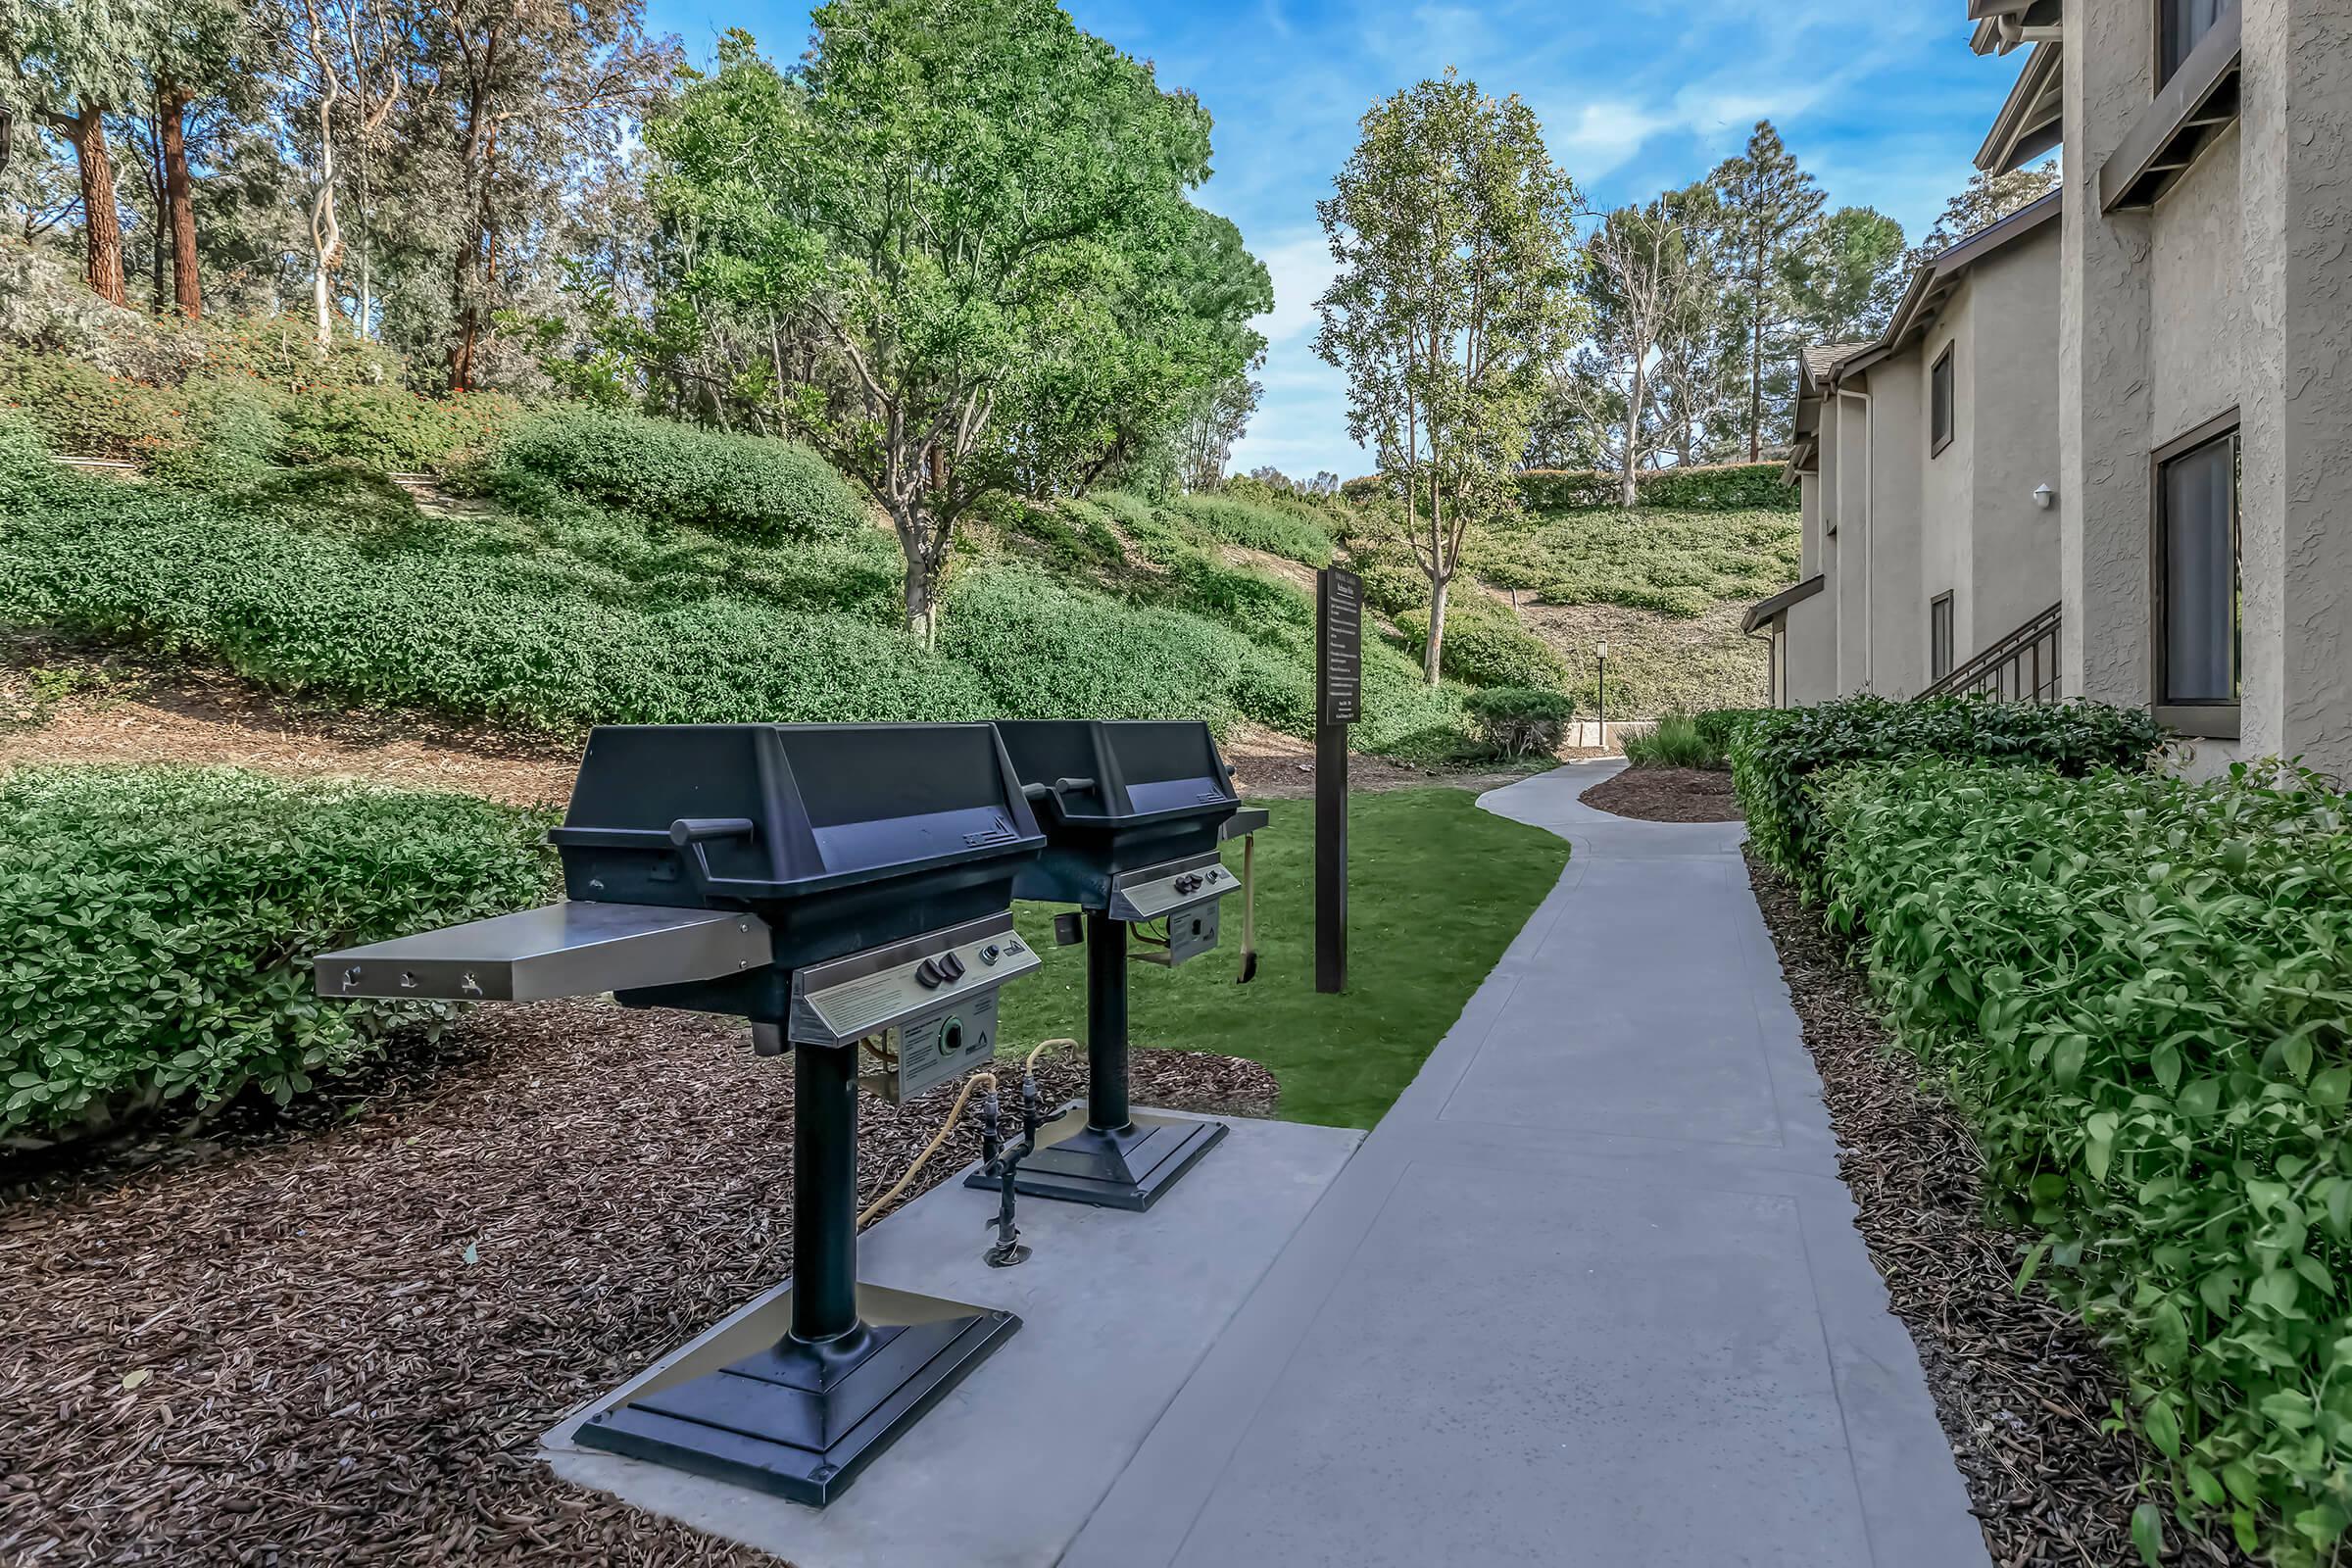 Two barbecues with green landscaping